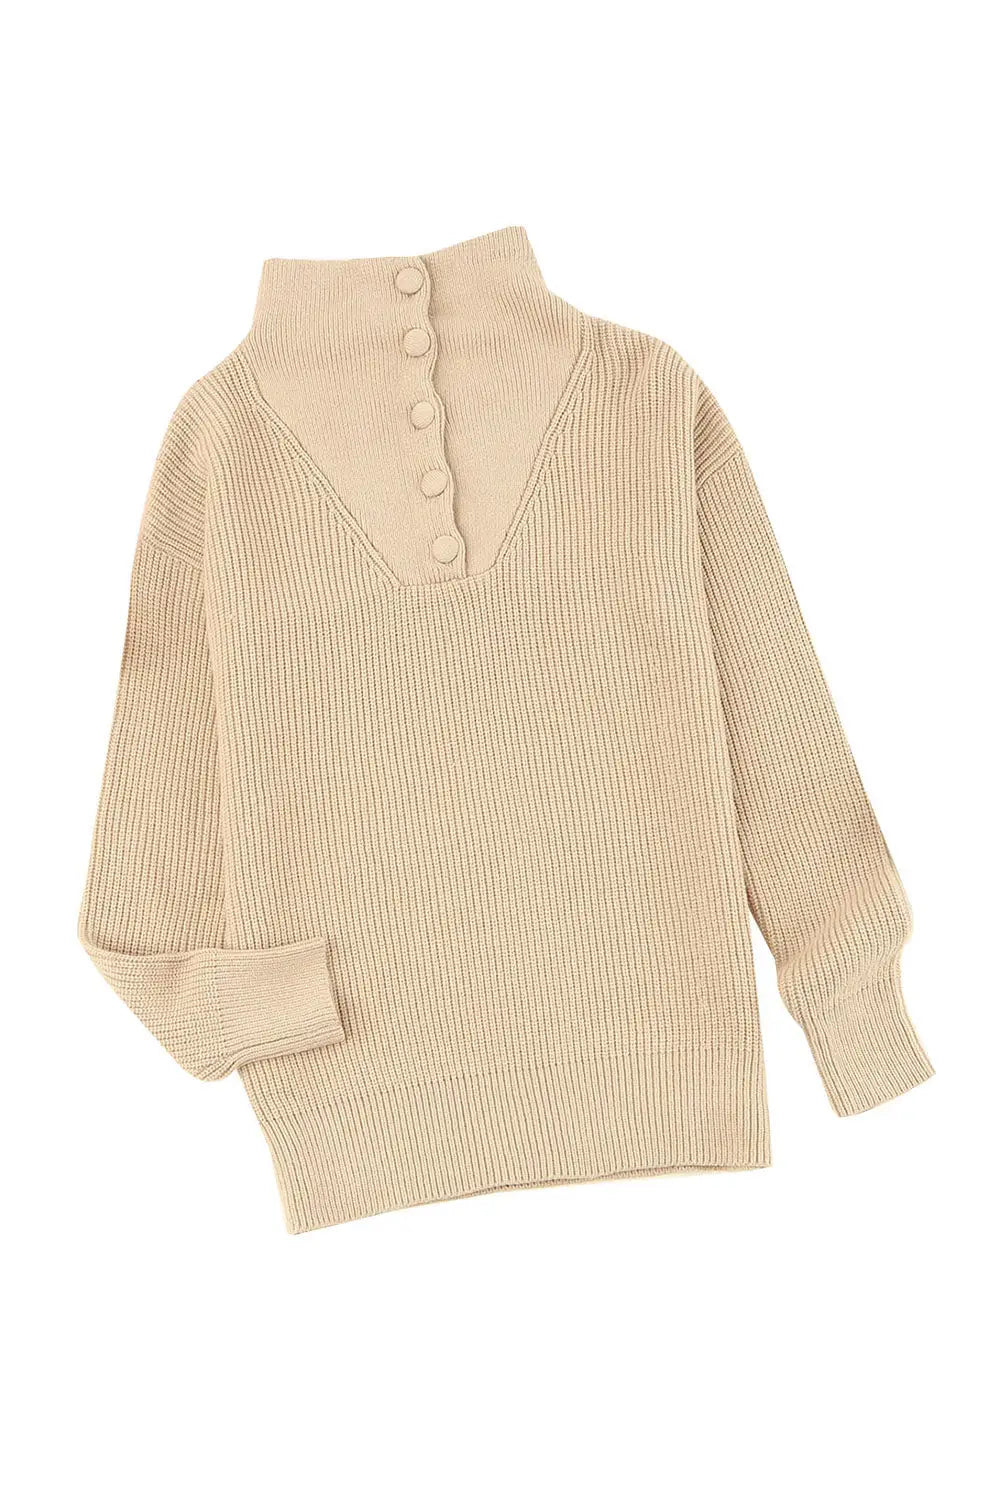 Khaki buttoned turn down collar comfy ribbed sweater - sweaters & cardigans